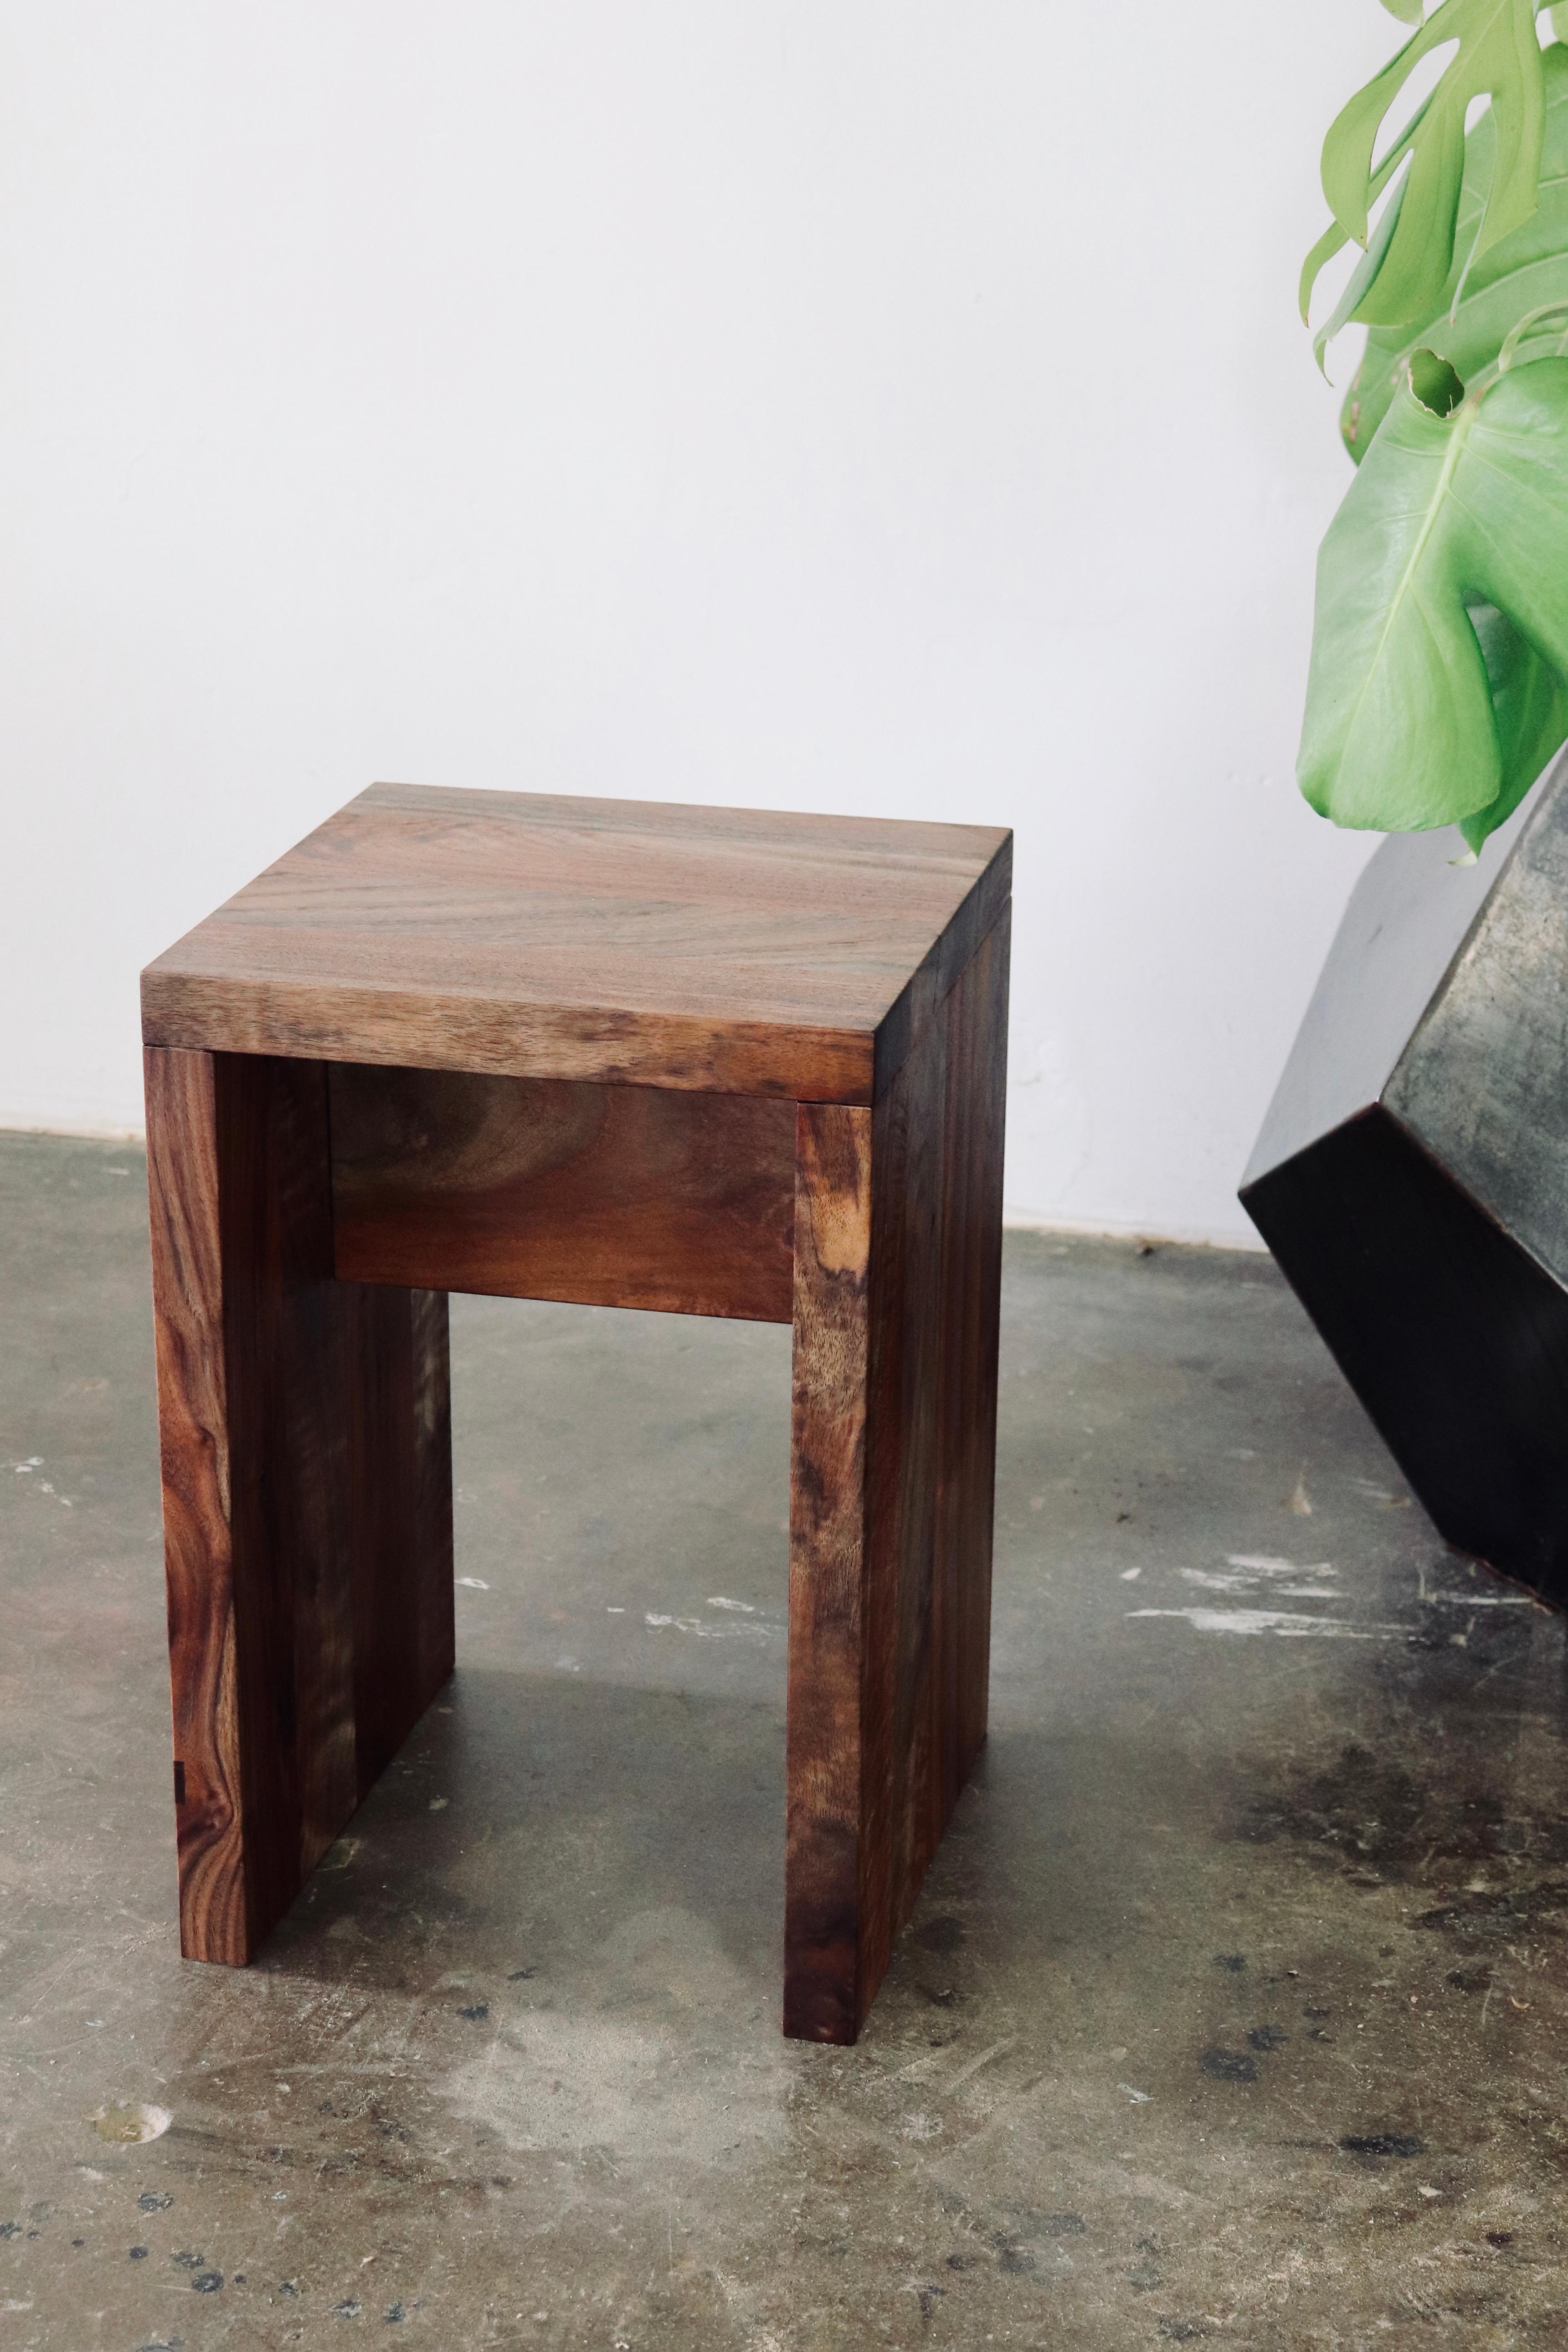 Oregon Black Walnut stool / side table is made to last. Handmade in Portland, Oregon with mortise and tenon joinery in Material's workshop. Available in a number of wood species.